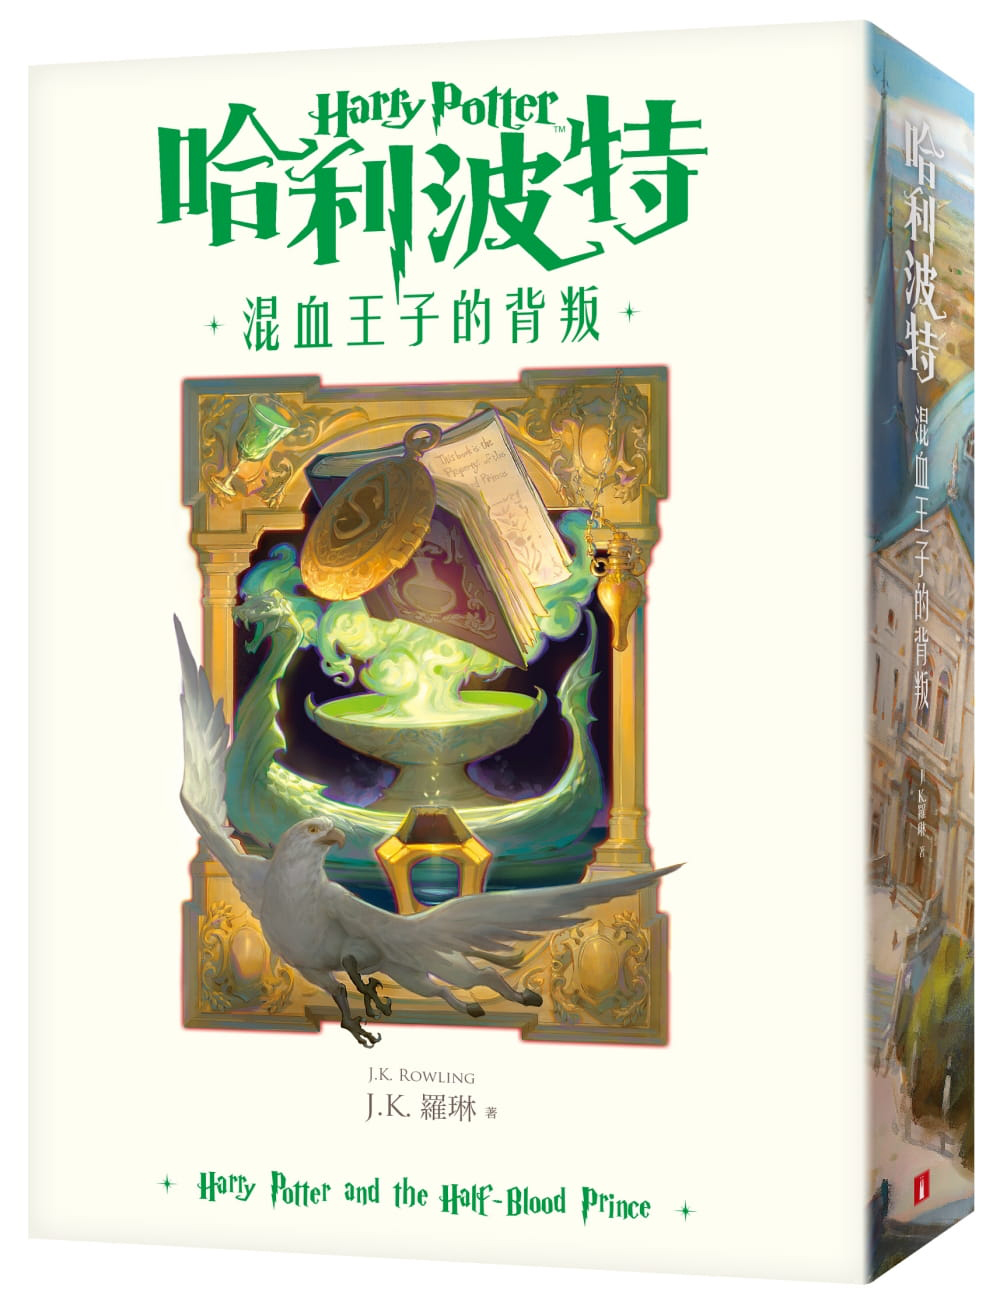 ‘Half-Blood Prince’ Traditional Chinese 20th anniversary edition